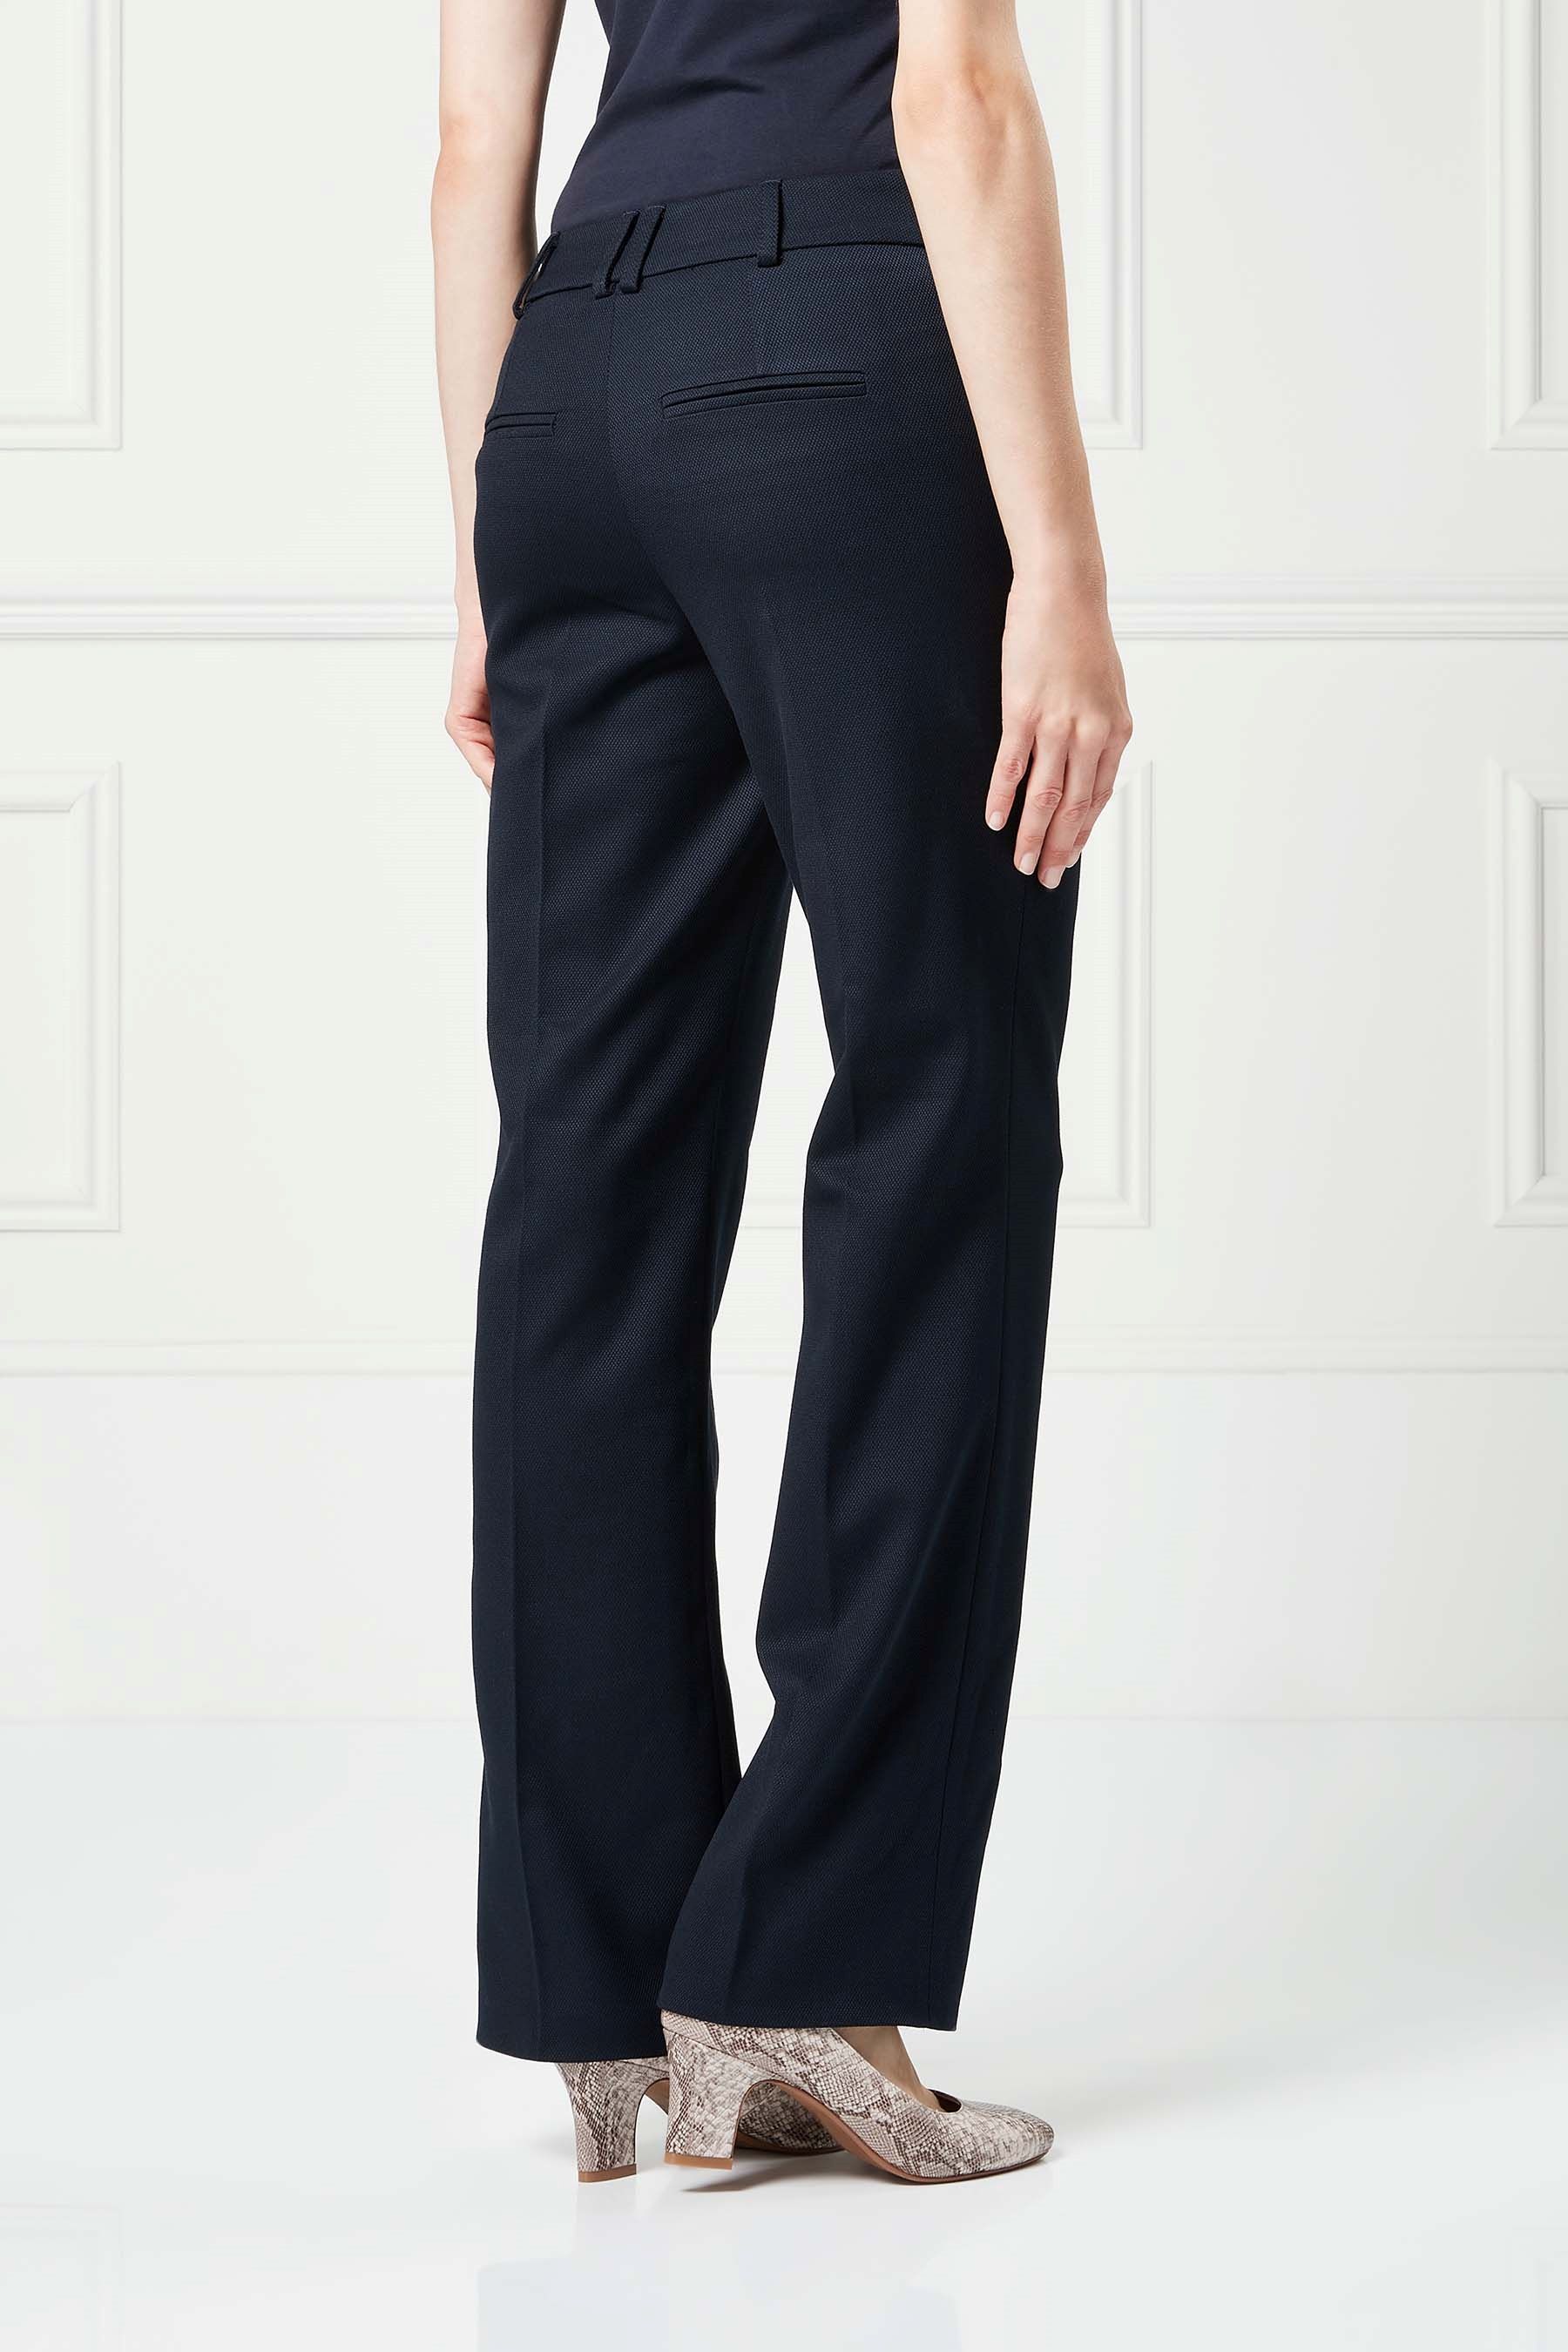 TAILORED SLOUCH TROUSER – Ev'ry Woman